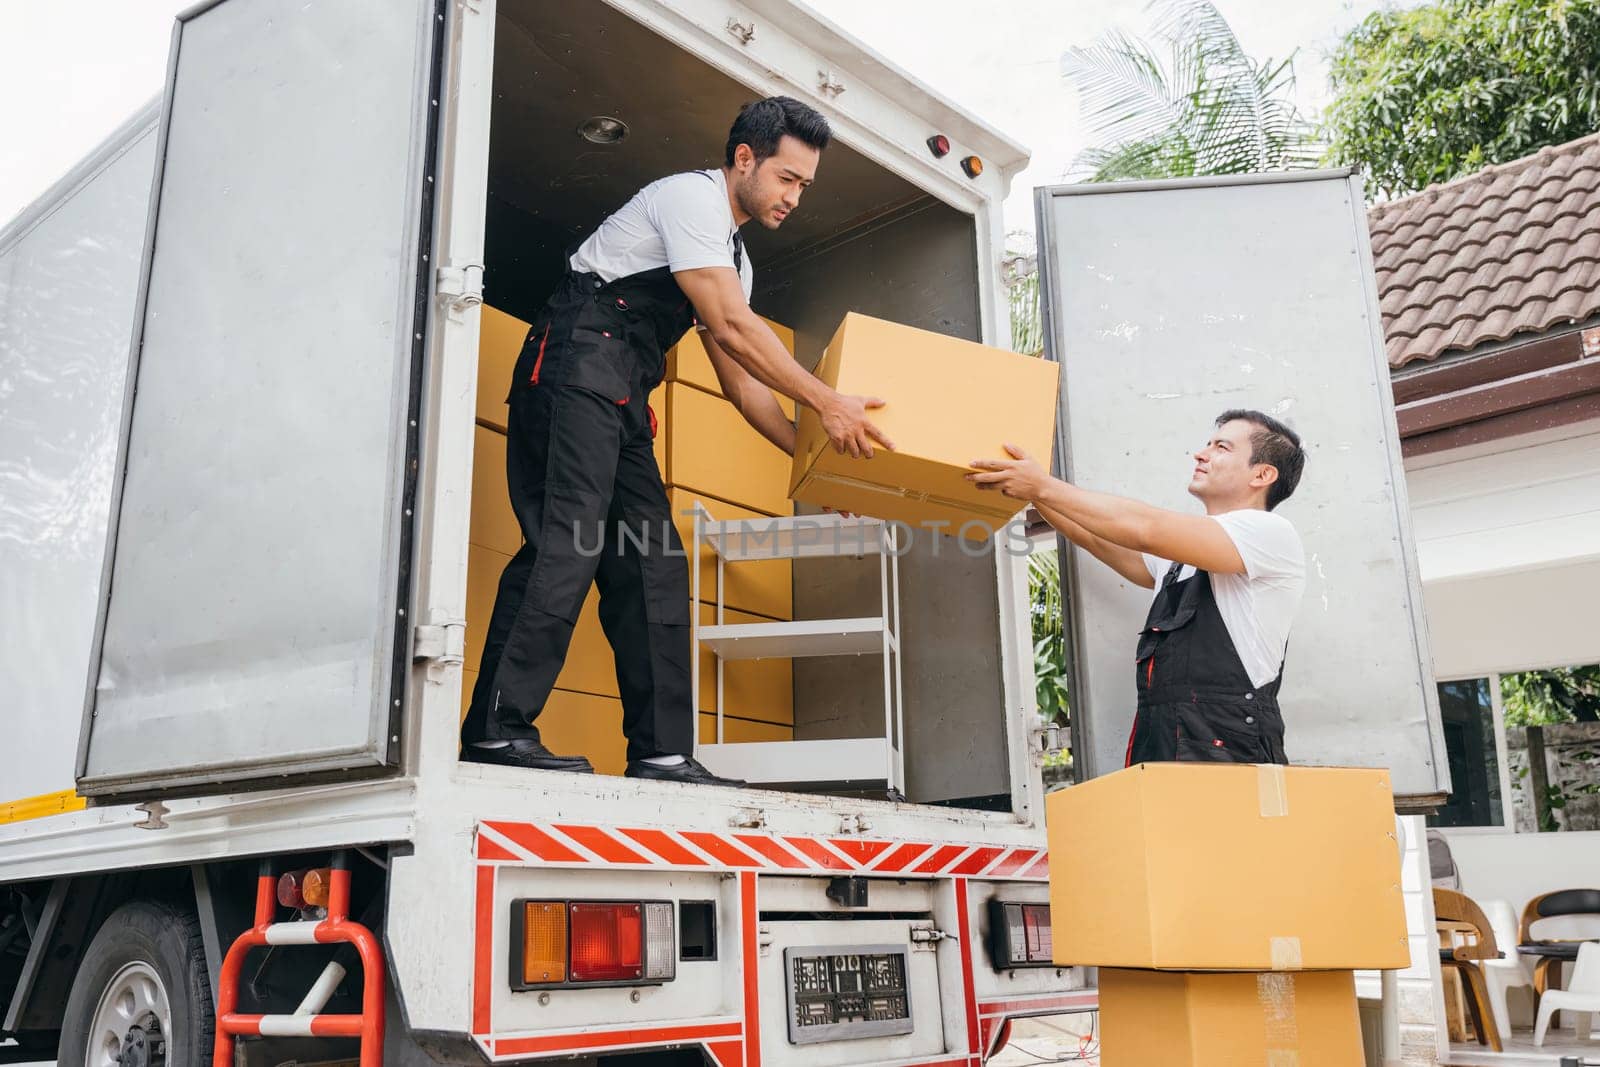 Workers in uniform exhibit teamwork unloading cardboard boxes from the moving truck for customer relocation. The company efficient service ensures a happy move. Moving Day by Sorapop